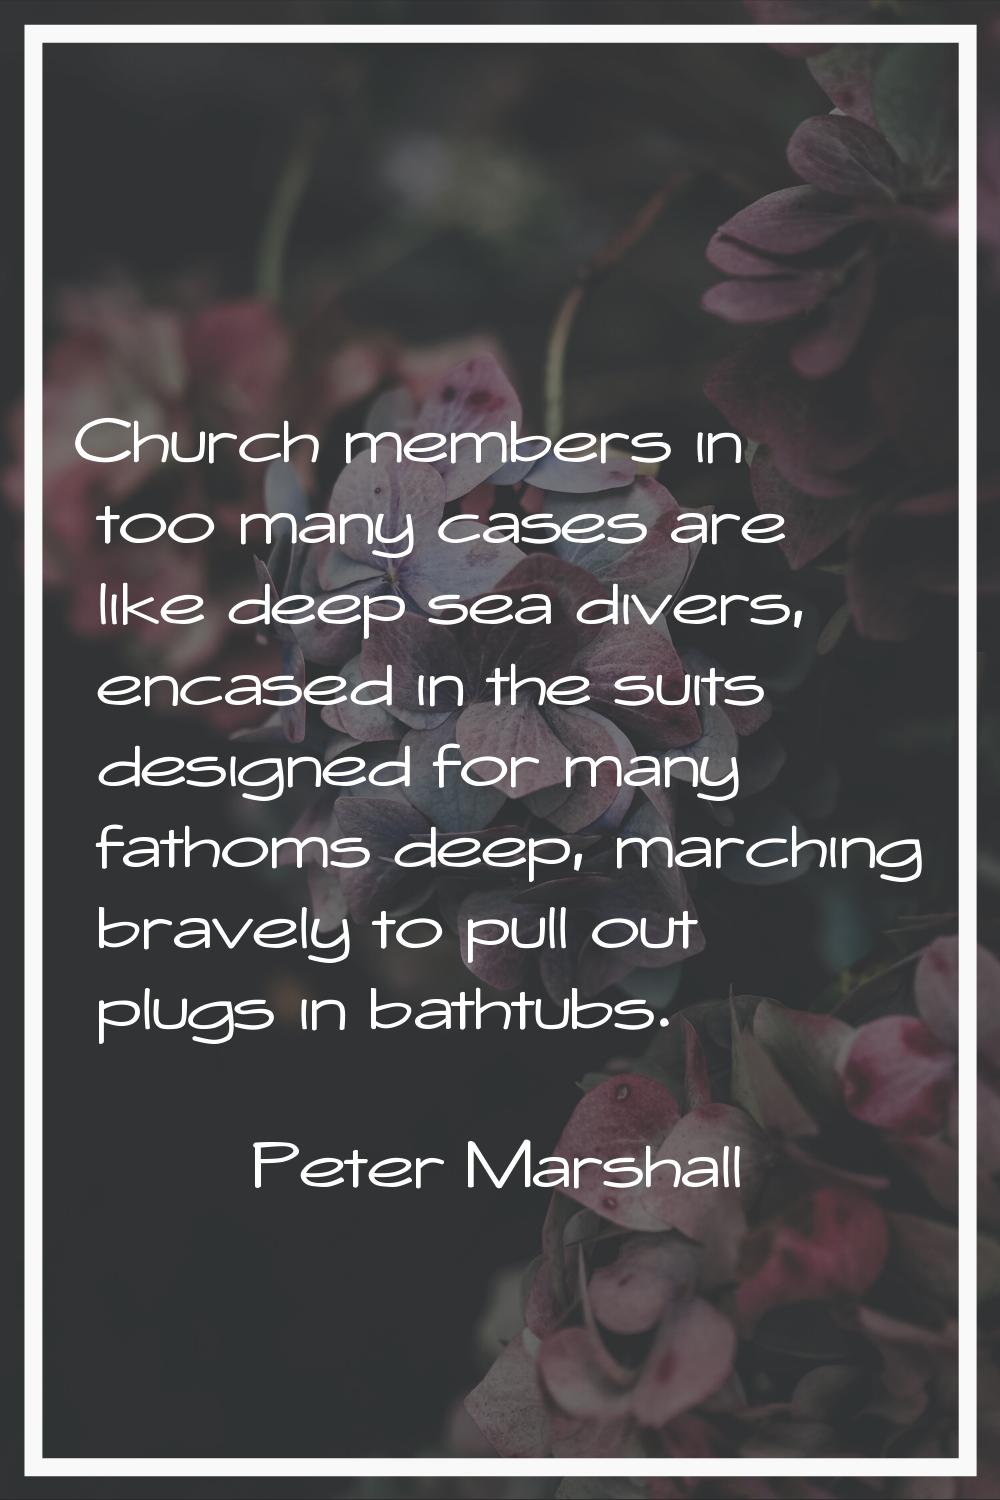 Church members in too many cases are like deep sea divers, encased in the suits designed for many f